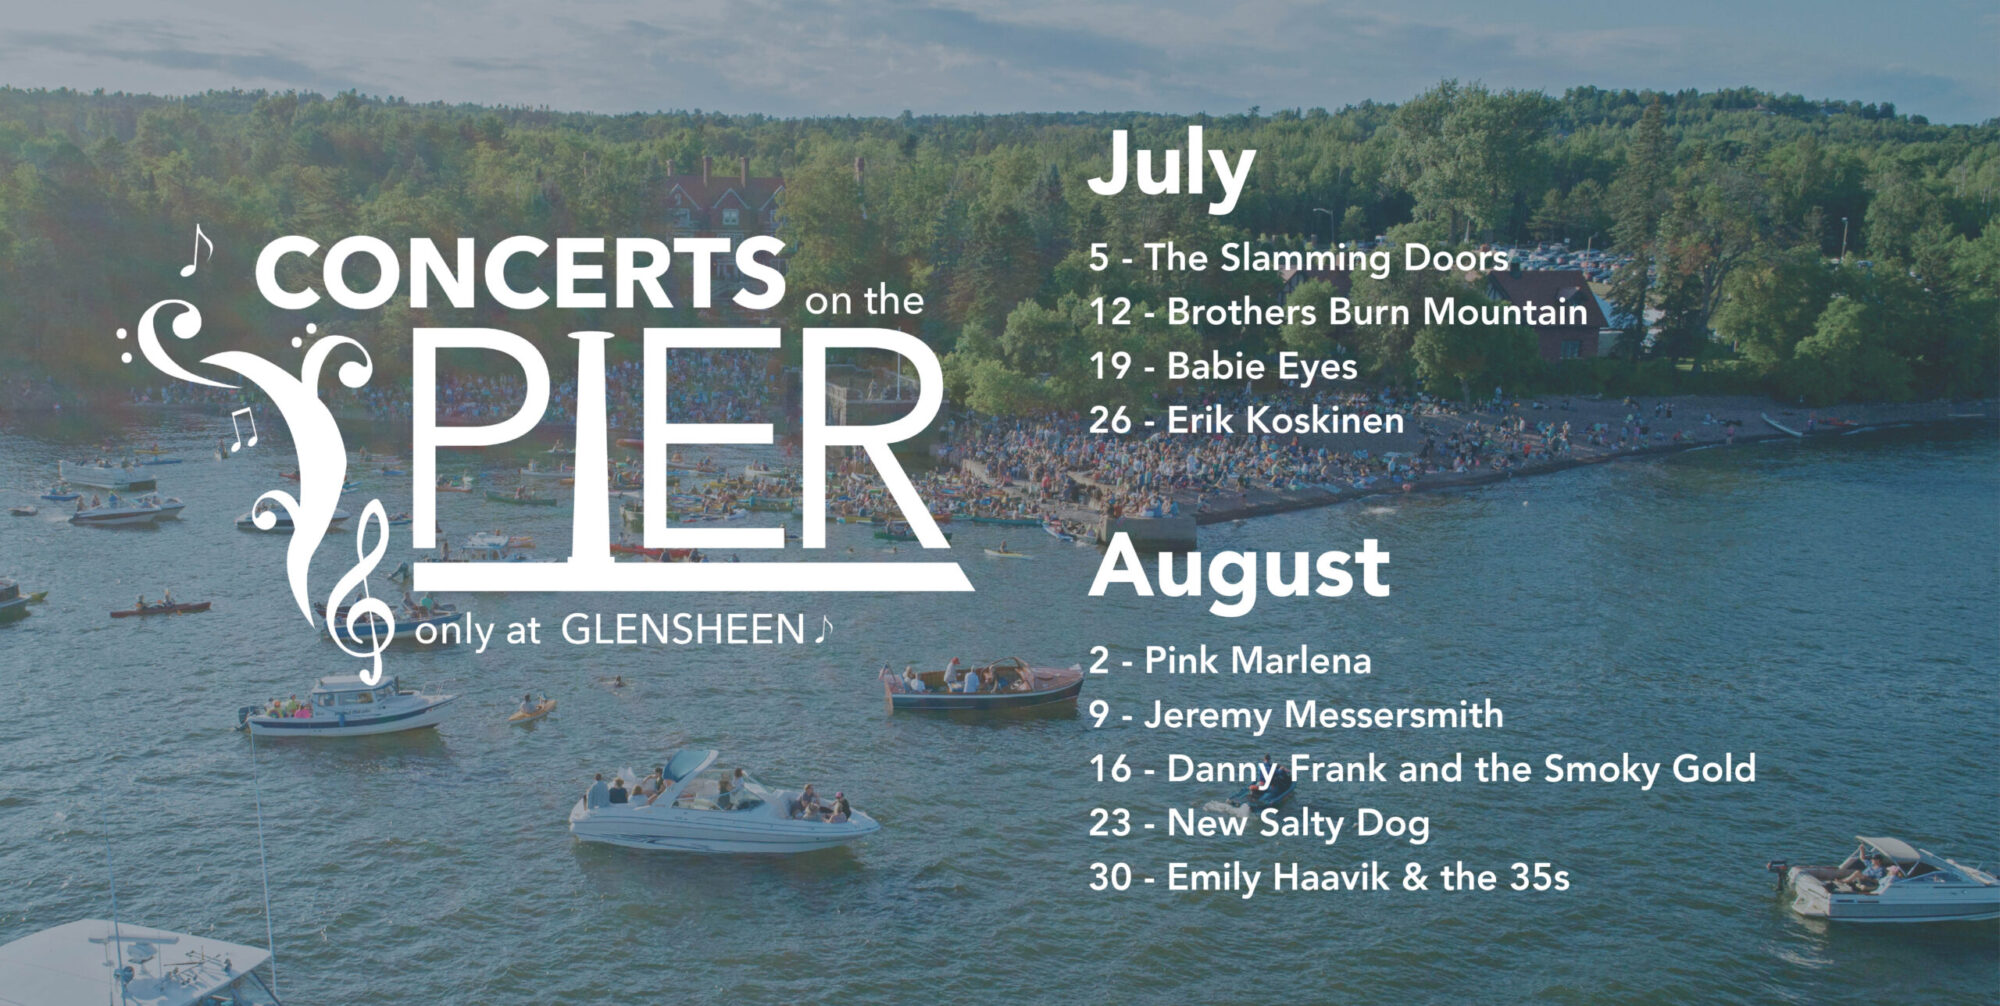 2023 Concerts on the Pier Lineup: July 5: The Slamming Doors July 12: Brothers Burn Mountain July 19: Babie Eyes July 26: Erik Koskinen August 2: Pink Marlena August 9: Jeremy Messersmith August 16: Danny Frank and the Smoky Gold August 23: New Salty Dog August 30: Emily Haavik & The 35s Image of boats on the water along the shoreline in the background.